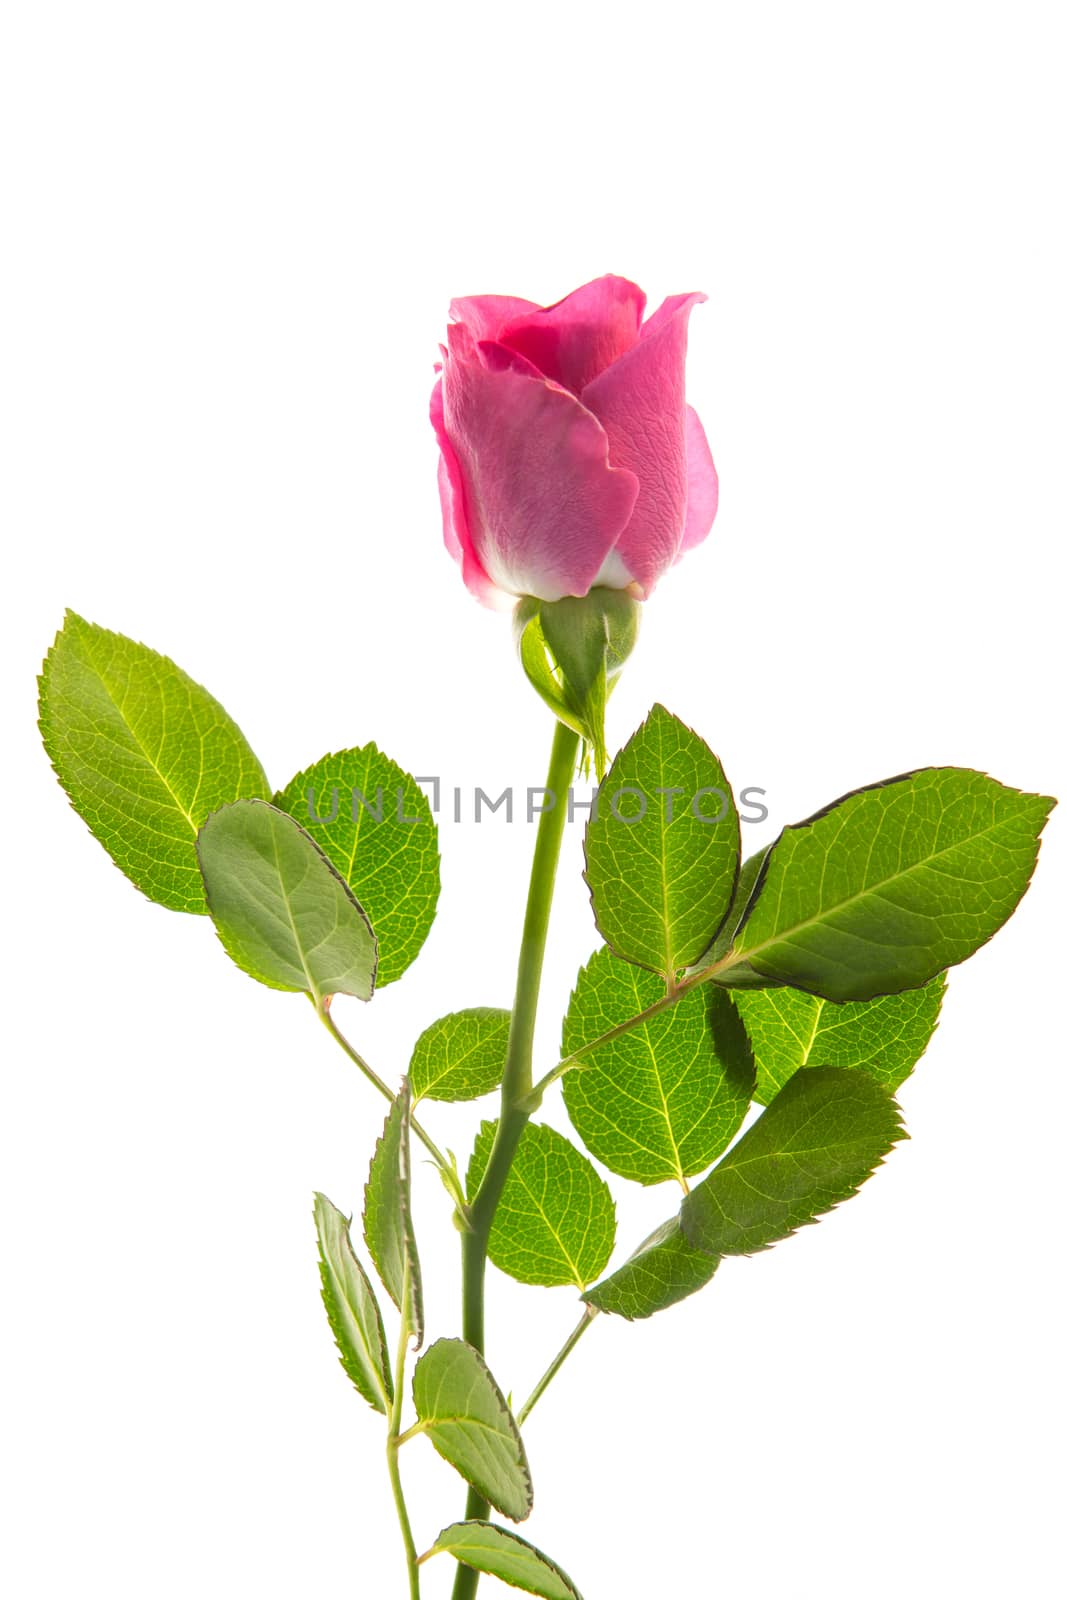 Pink rose in bloom with stalk and leaves by Wavebreakmedia